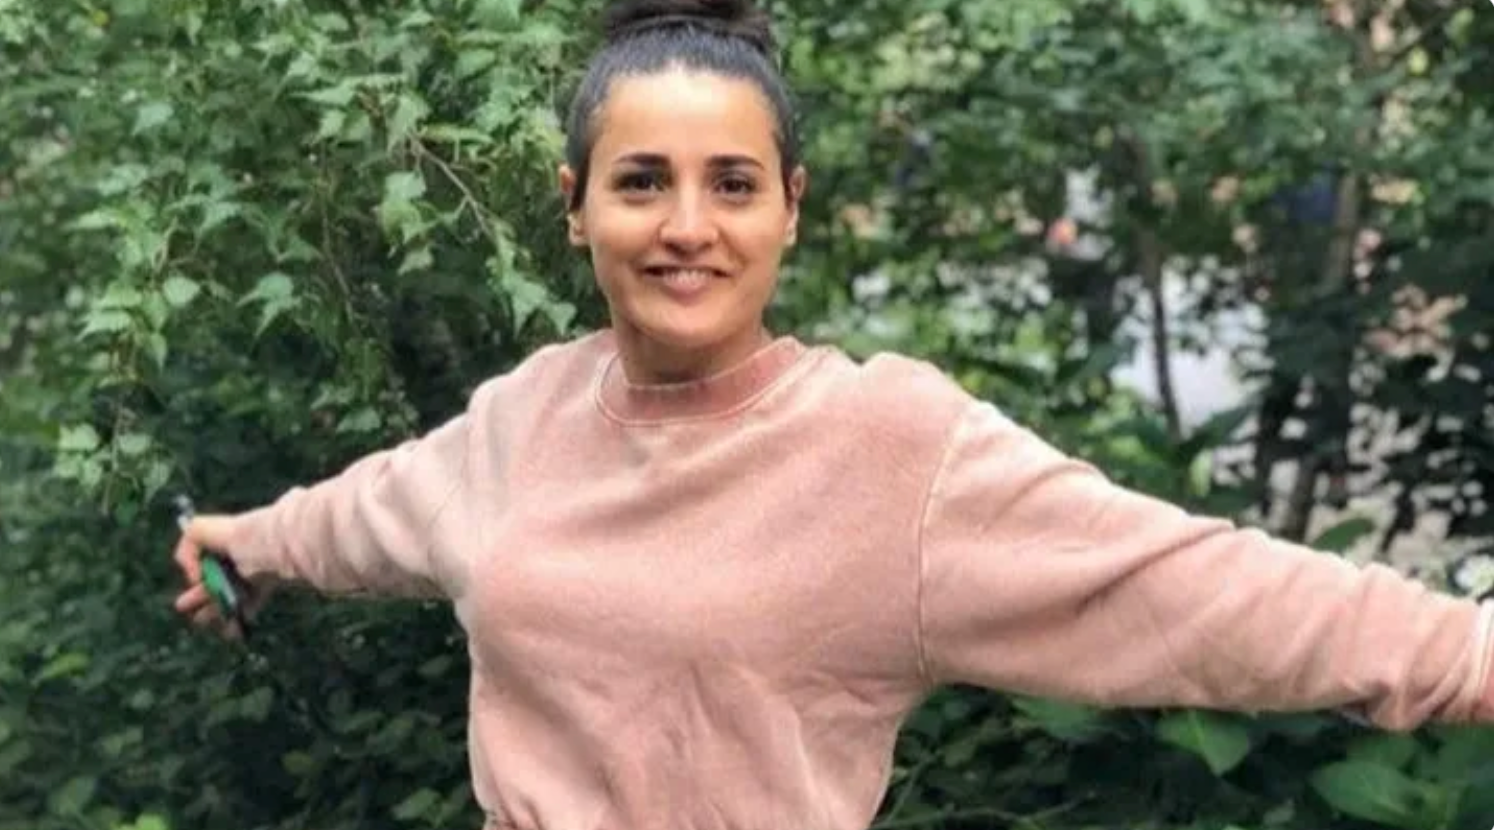 Emine Yilmaz Ozsoy, 35, was paralysed after being shoved into a New York subway train, family say